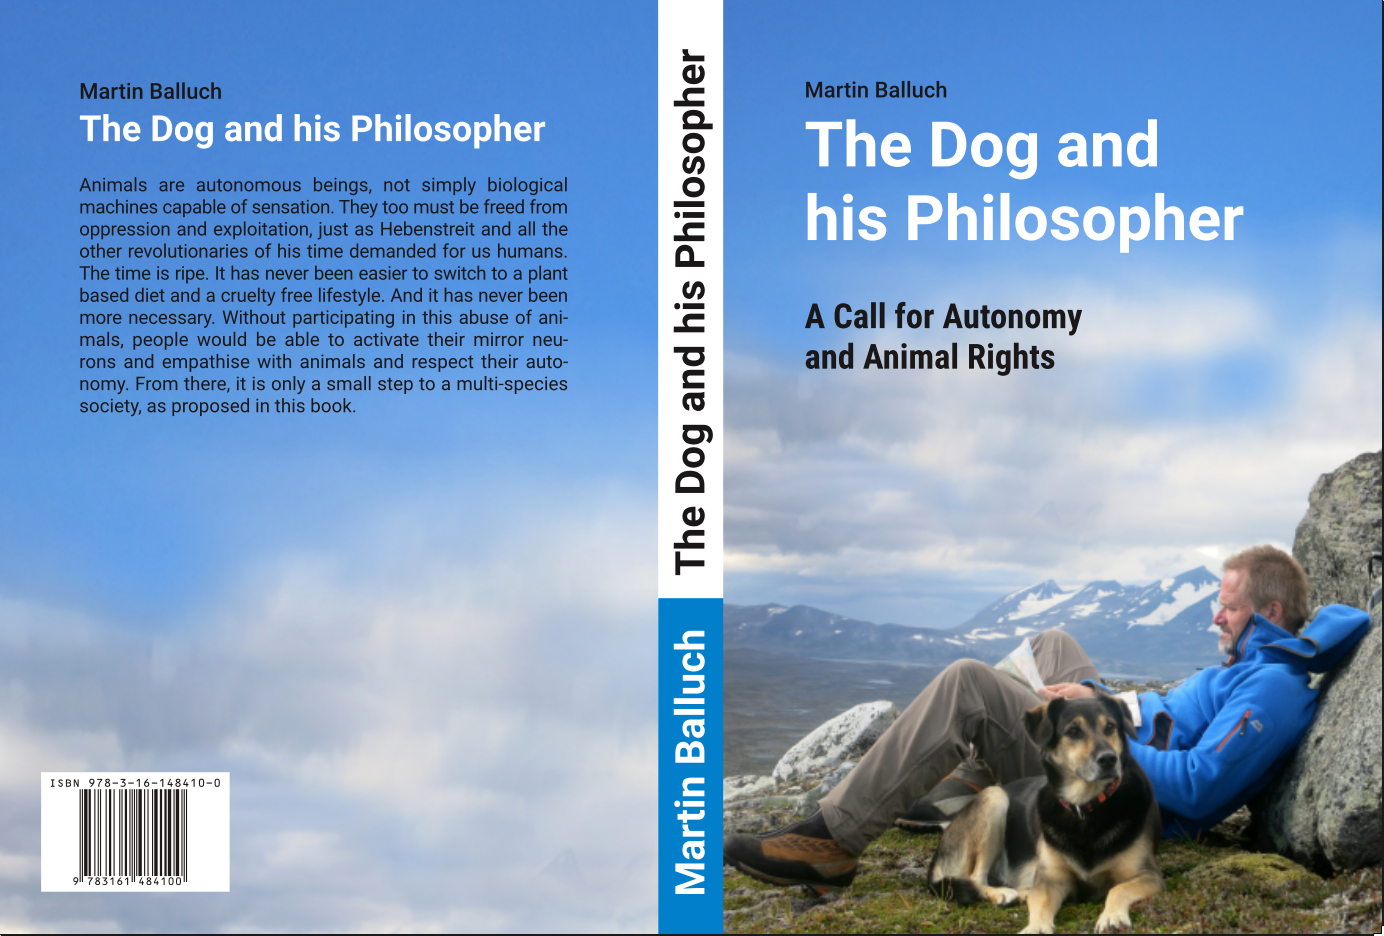 „The Dog and his Philosopher“ by Martin Balluch, published 2017